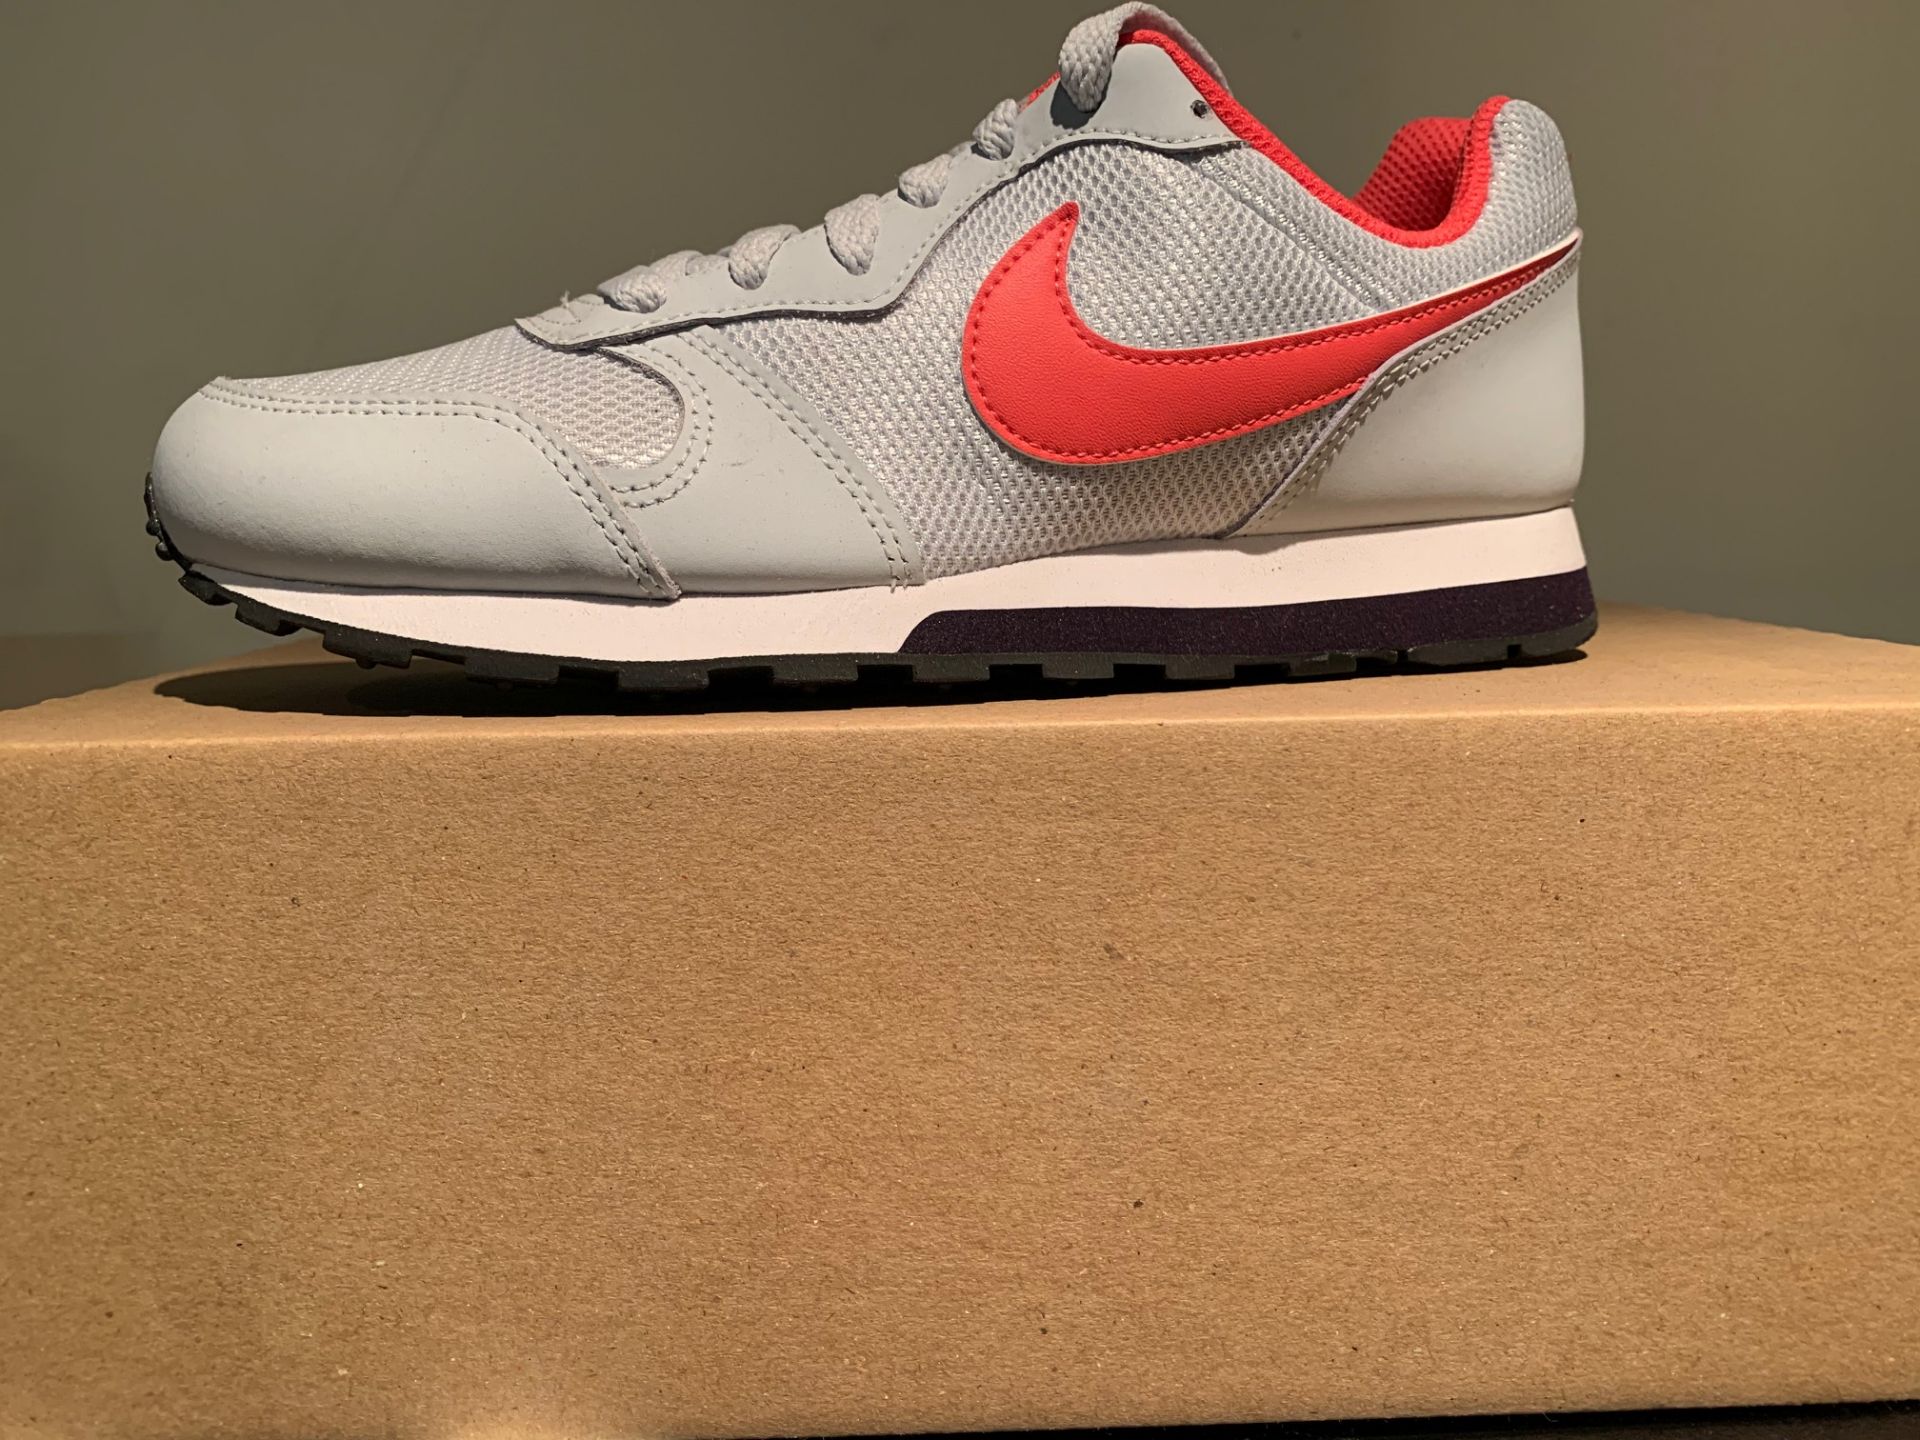 NEW & BOXED NIKE TRAINERS SIZE JUNIOR 4 (89 UPSTAIRS)